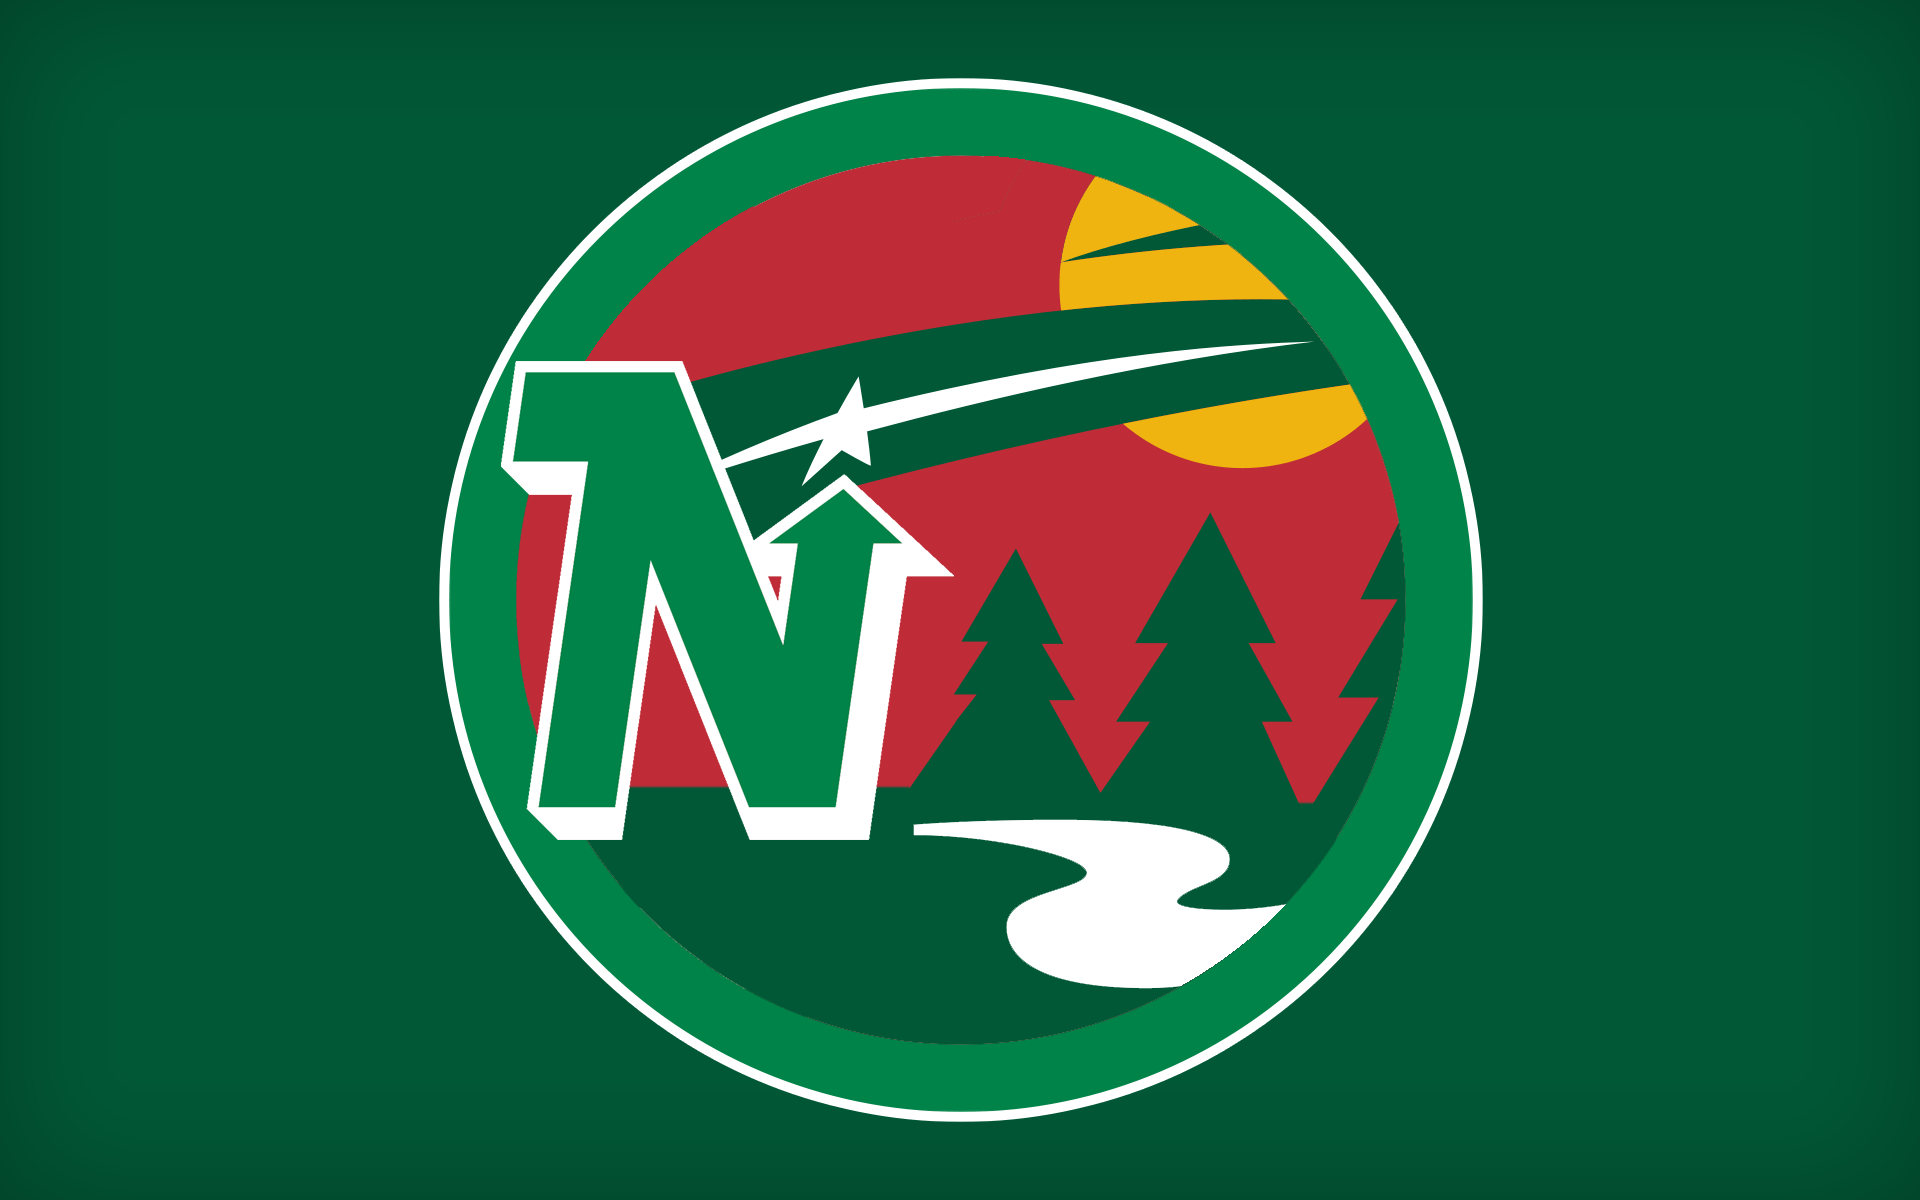 BarDown: Some of these NHL team logo mashups are better than the